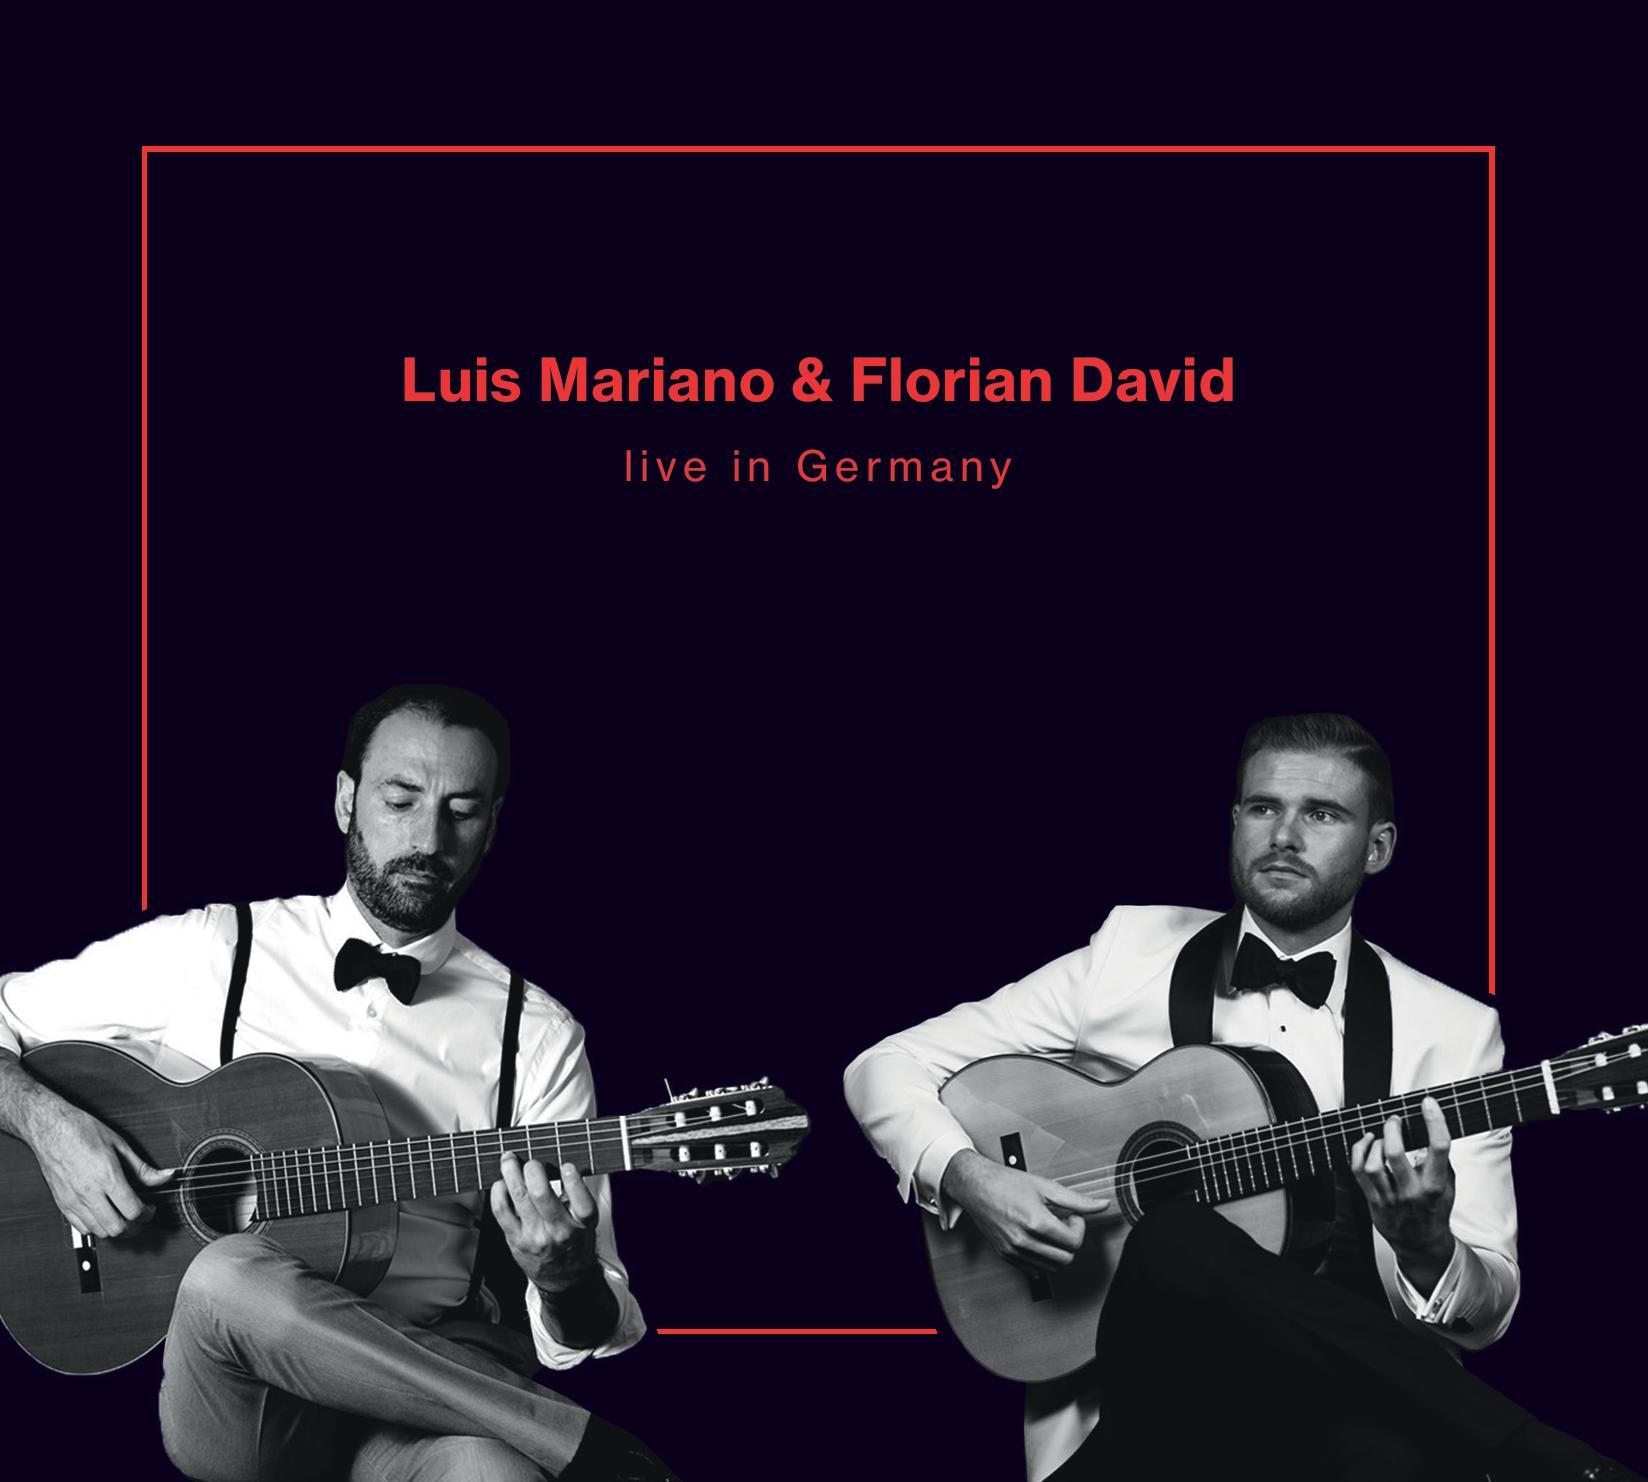 Luis Mariano & Florian David: Live in Germany